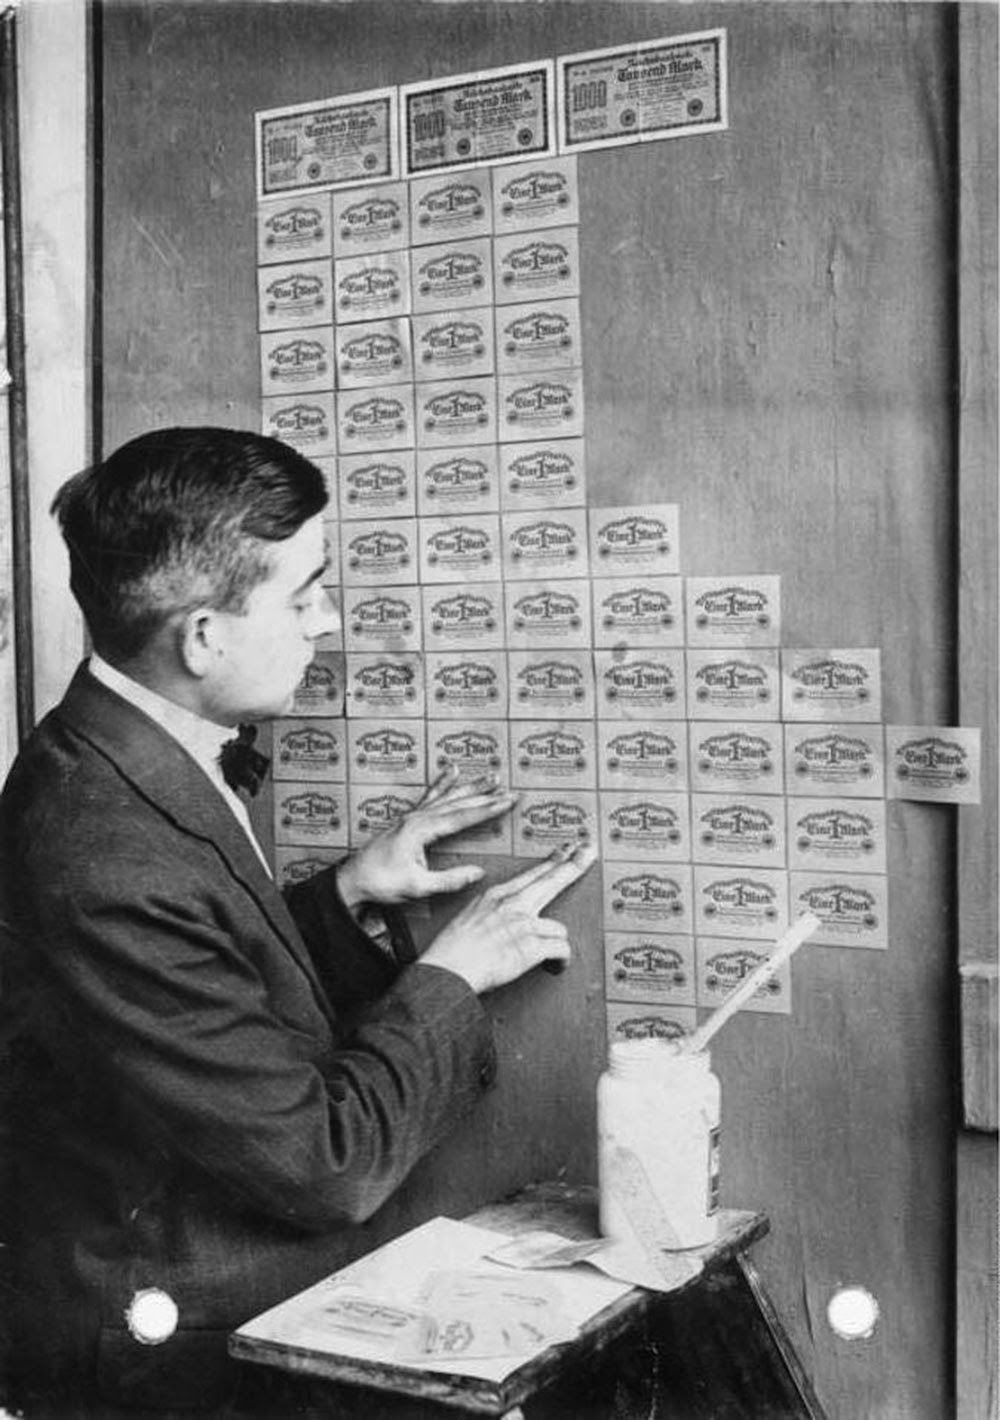 Using banknotes as wallpaper during hyperinflation, Germany 1923.